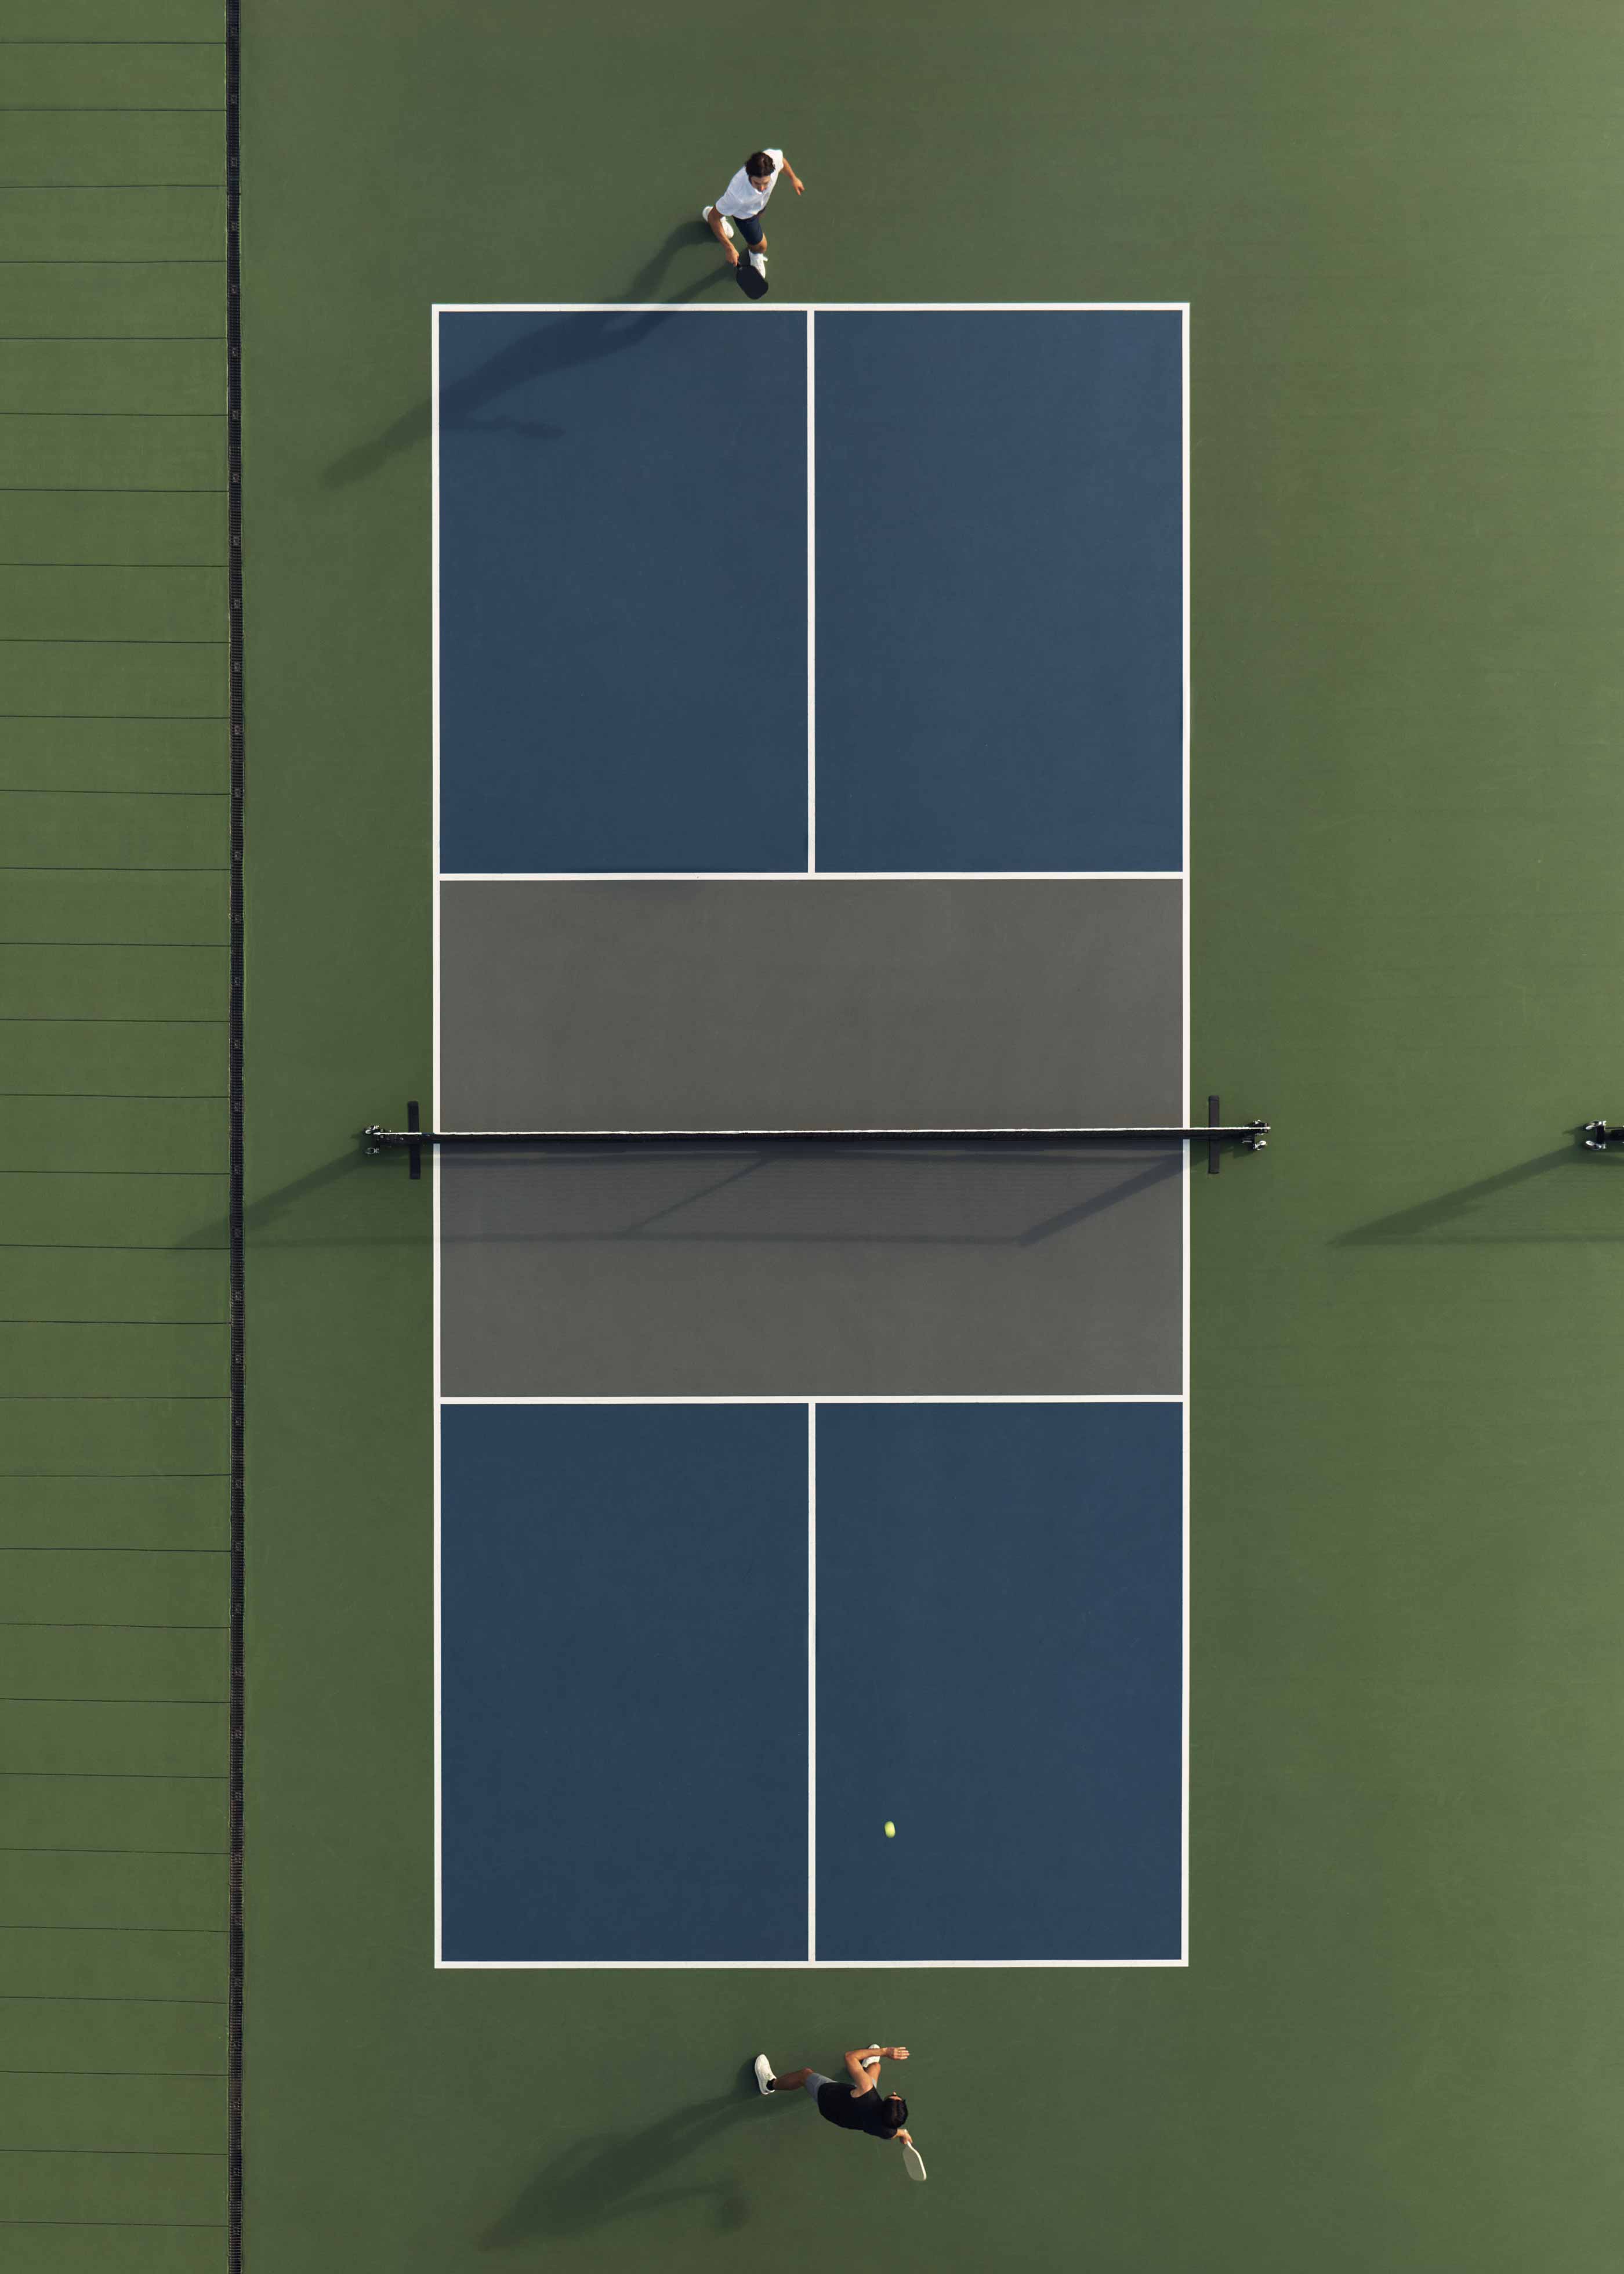 Aerial view of a doubles pickleball match on a Life Time court